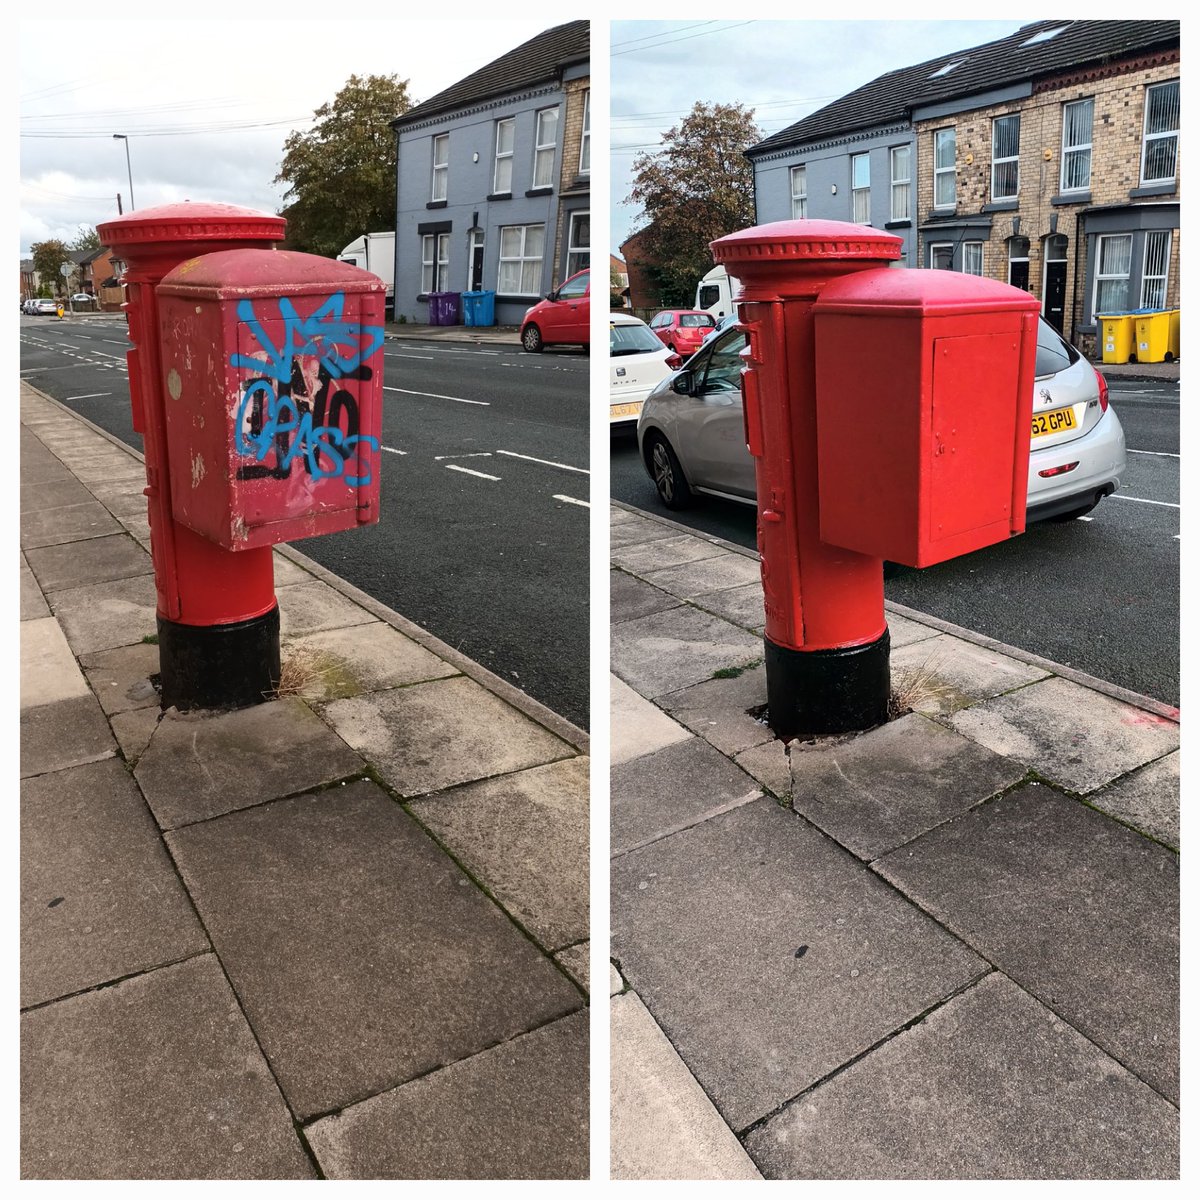 Thanks to @RoyalMailHelp @RoyalMail for coming out and painting over this offensive & ugly scribble on our local post box! Much appreciated by the community in  Liverpool L7 #keepliverpooltidy